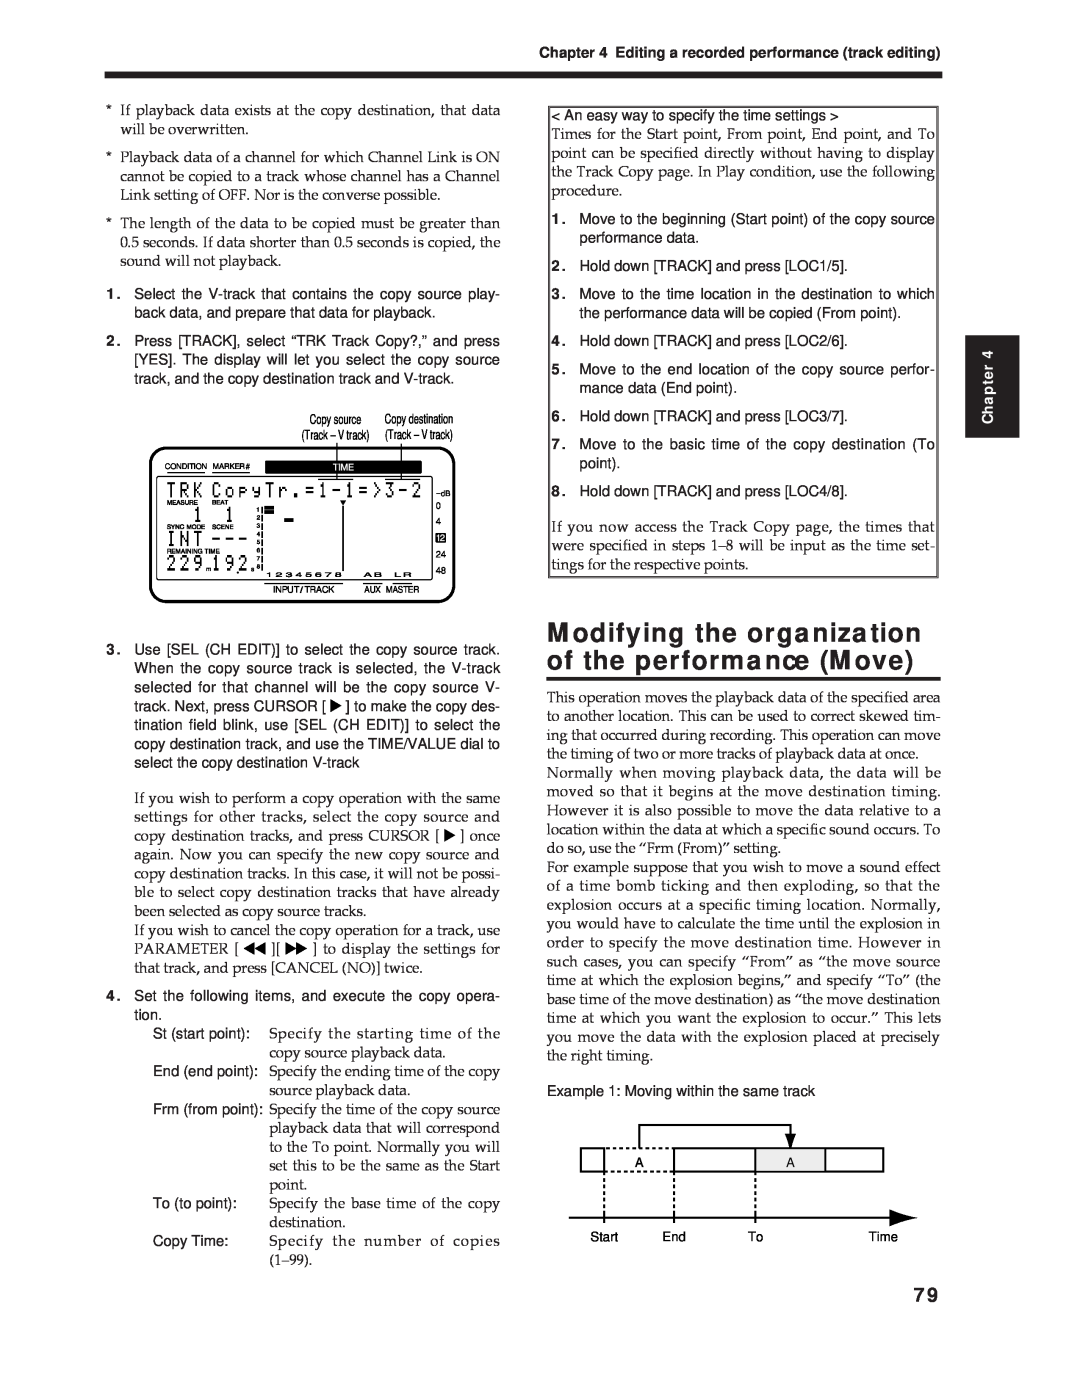 Roland Vs-880 important safety instructions Modifying the organization of the performance Move, Chapter 